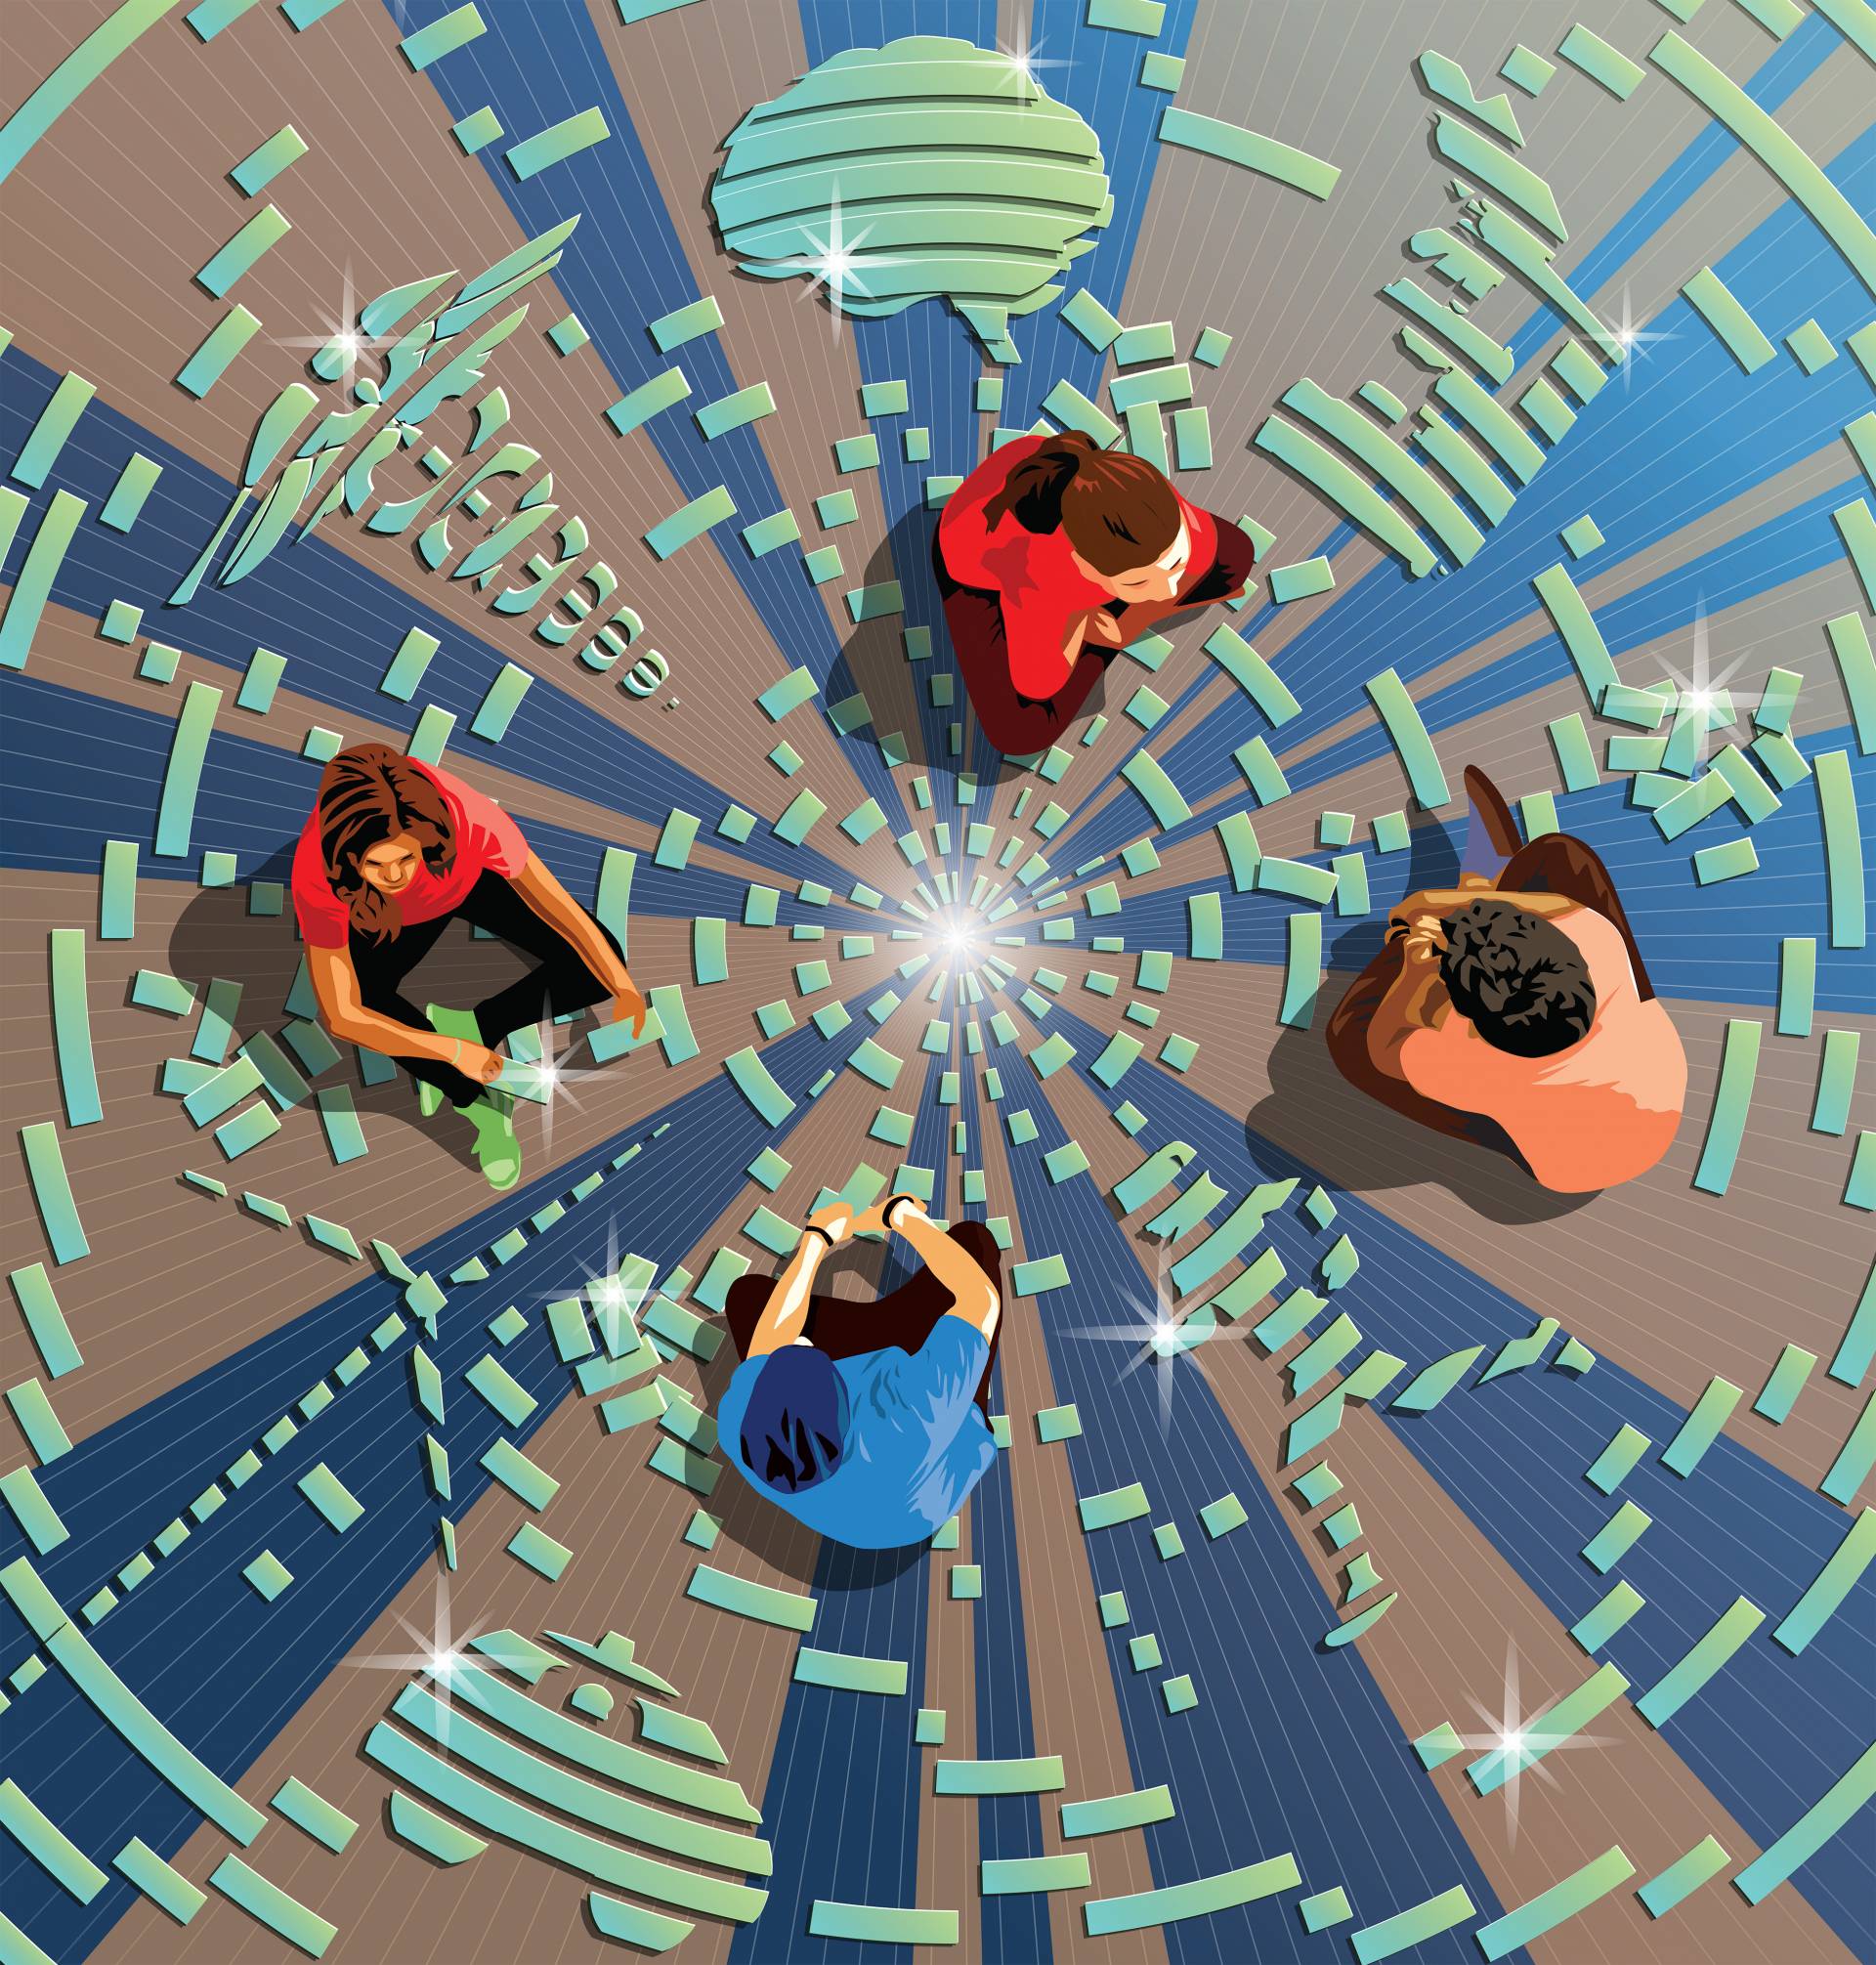 Illustration of 4 people sitting on a floor surrounded by geometric puzzle pieces